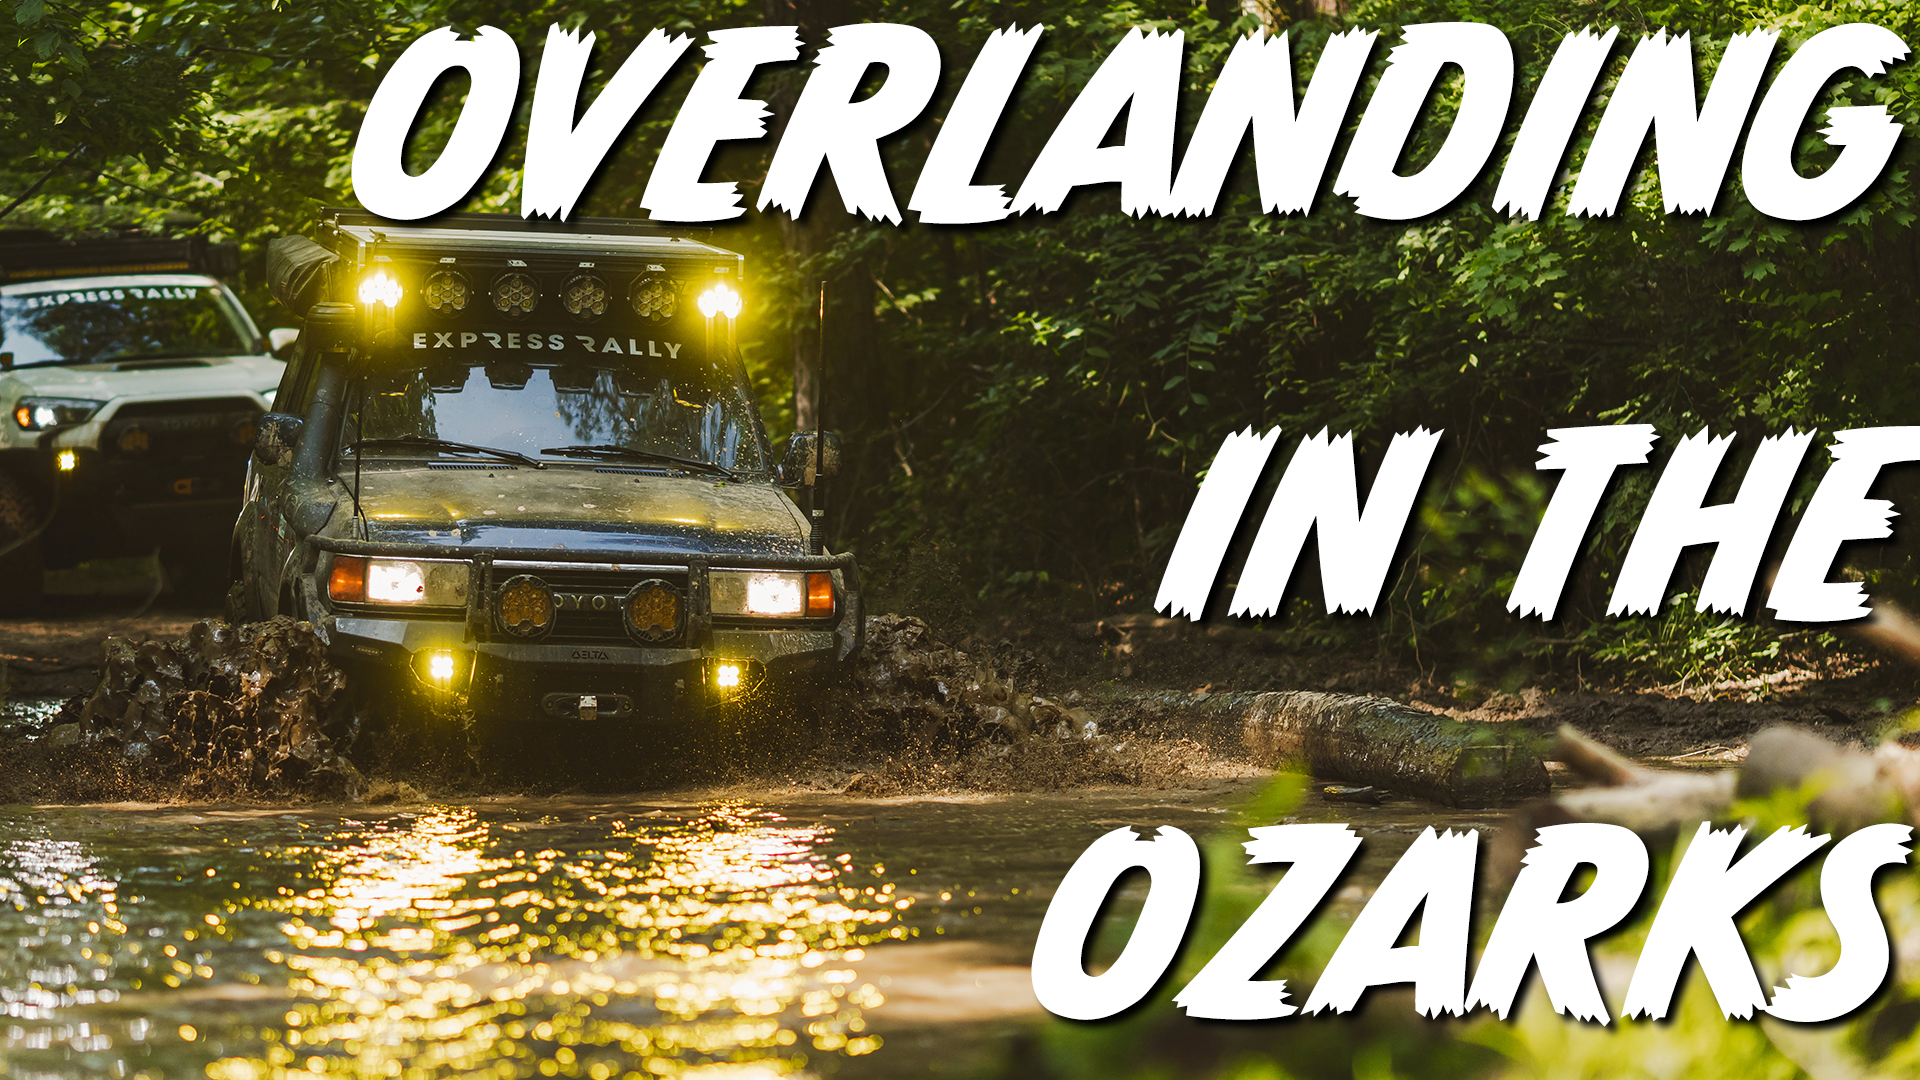 Ozarks Overlanding! An adventure in the woods in a big old Land Cruiser